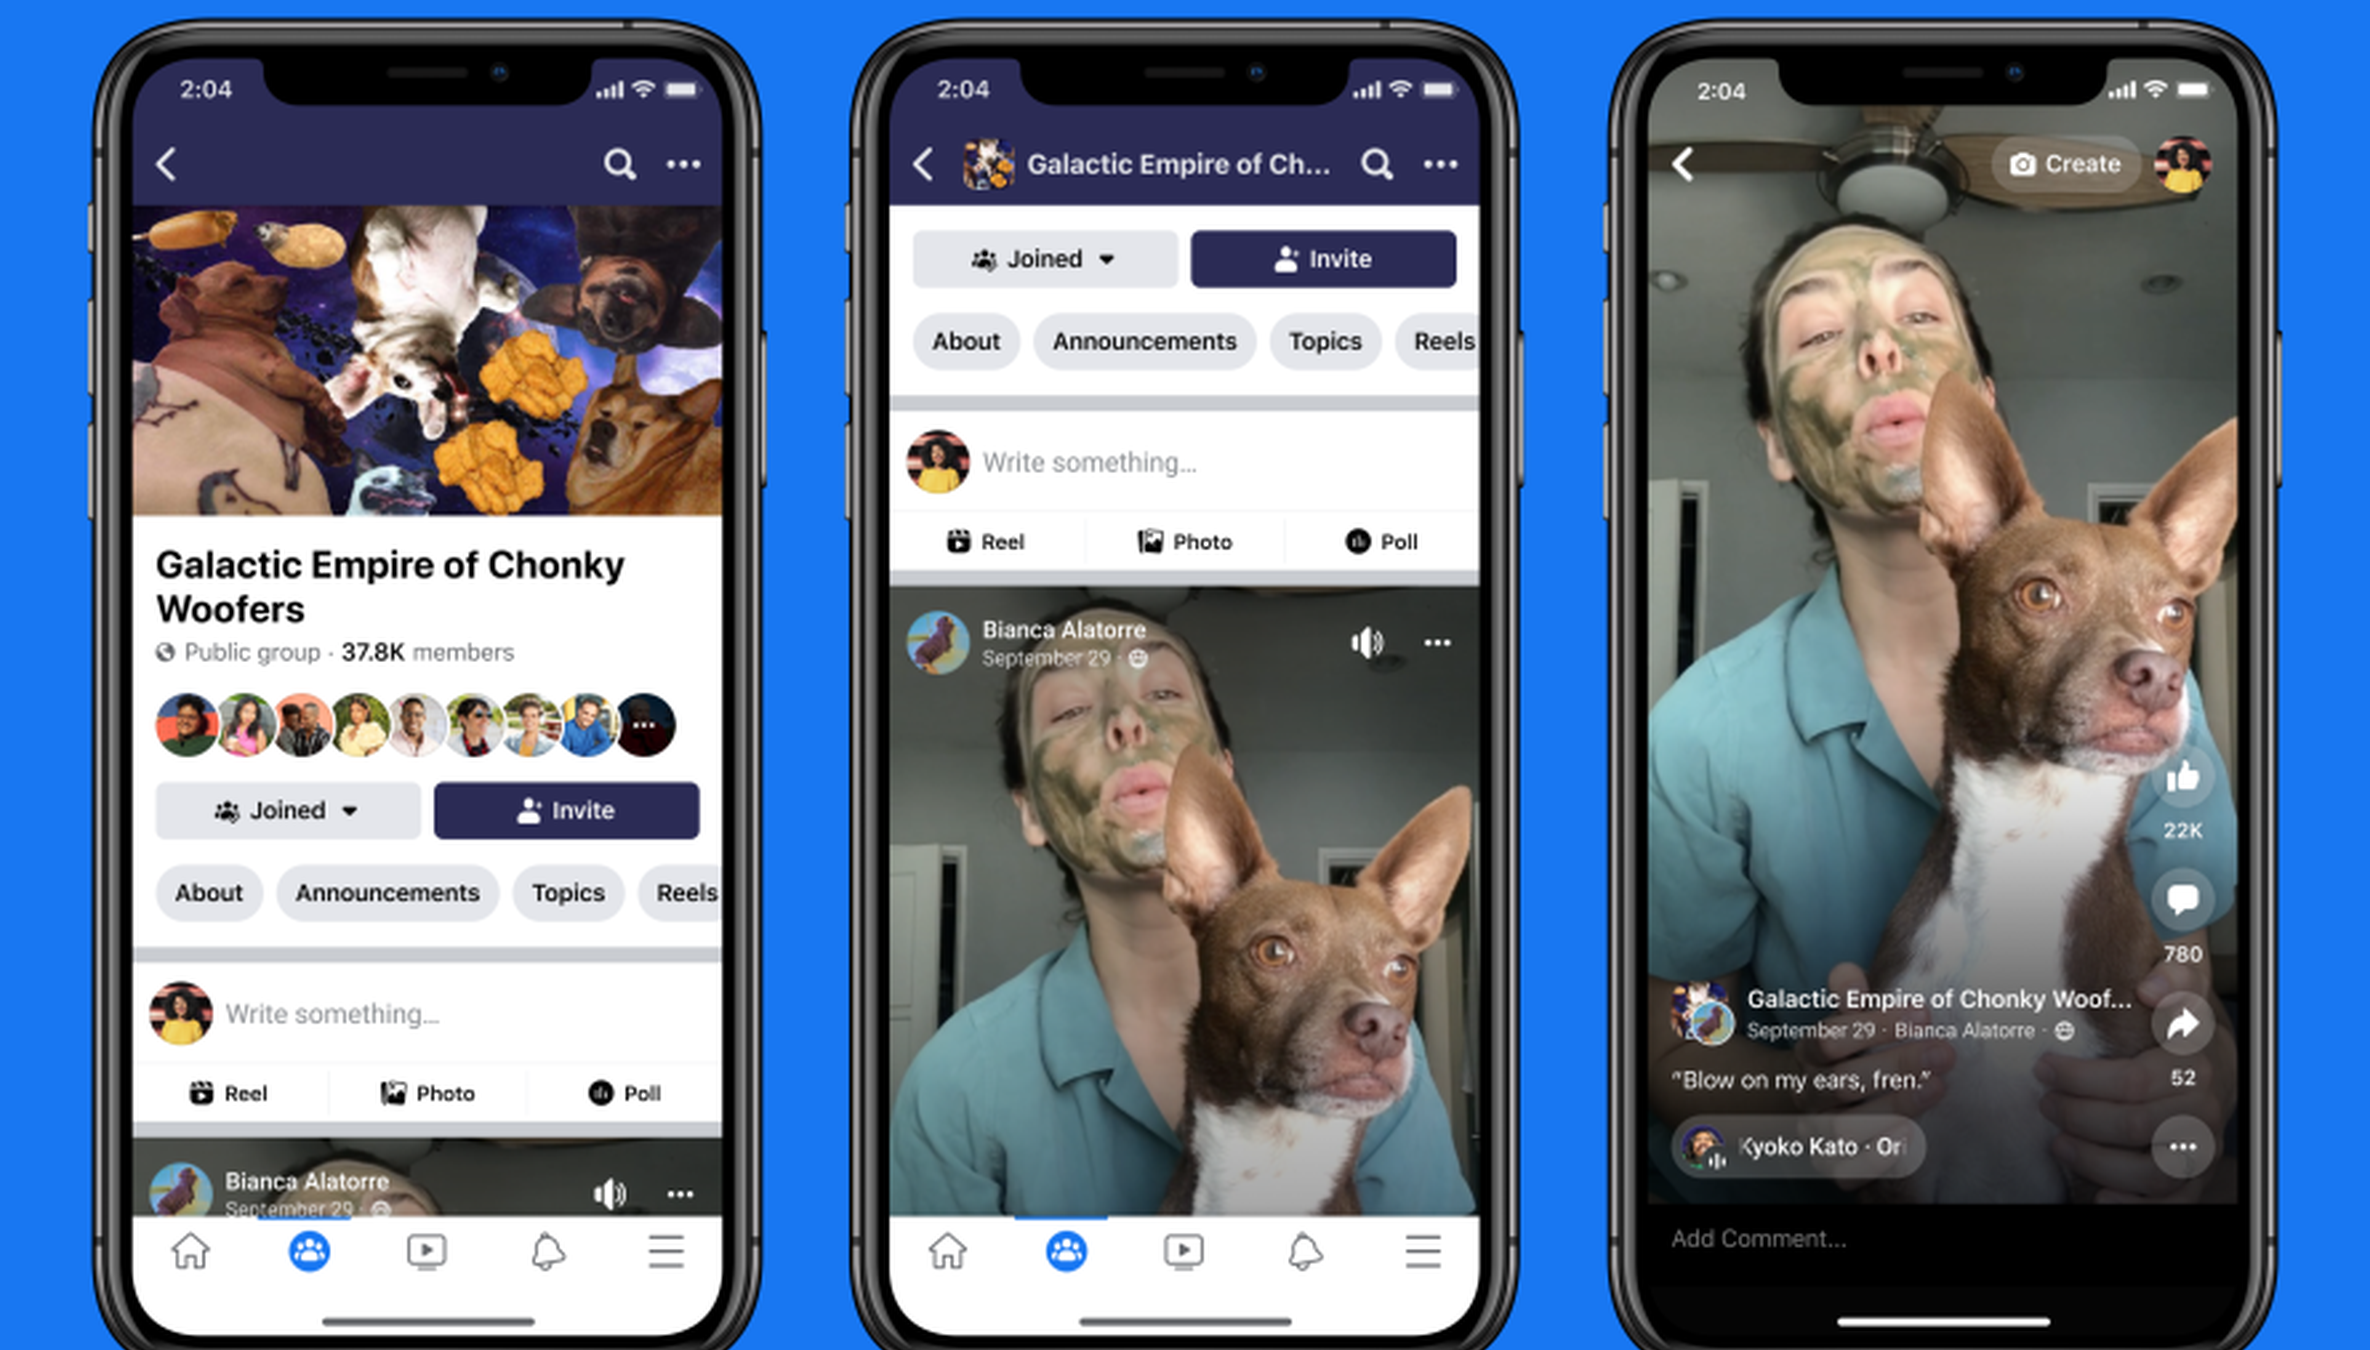 How to Add Music to Facebook Story in 3 Best Ways in 2023